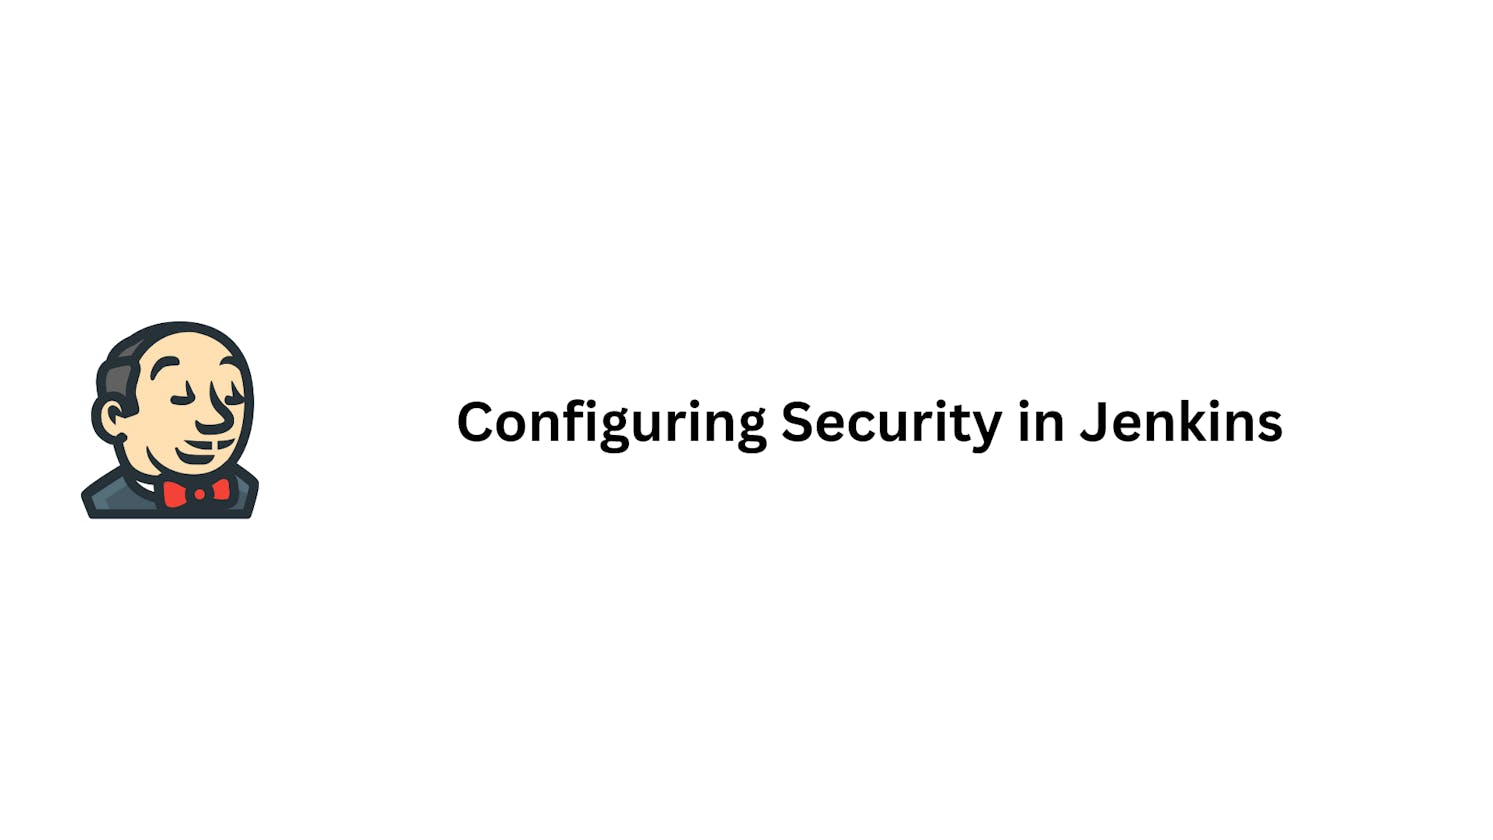 Configuring Security in Jenkins: Enhancing Access Control